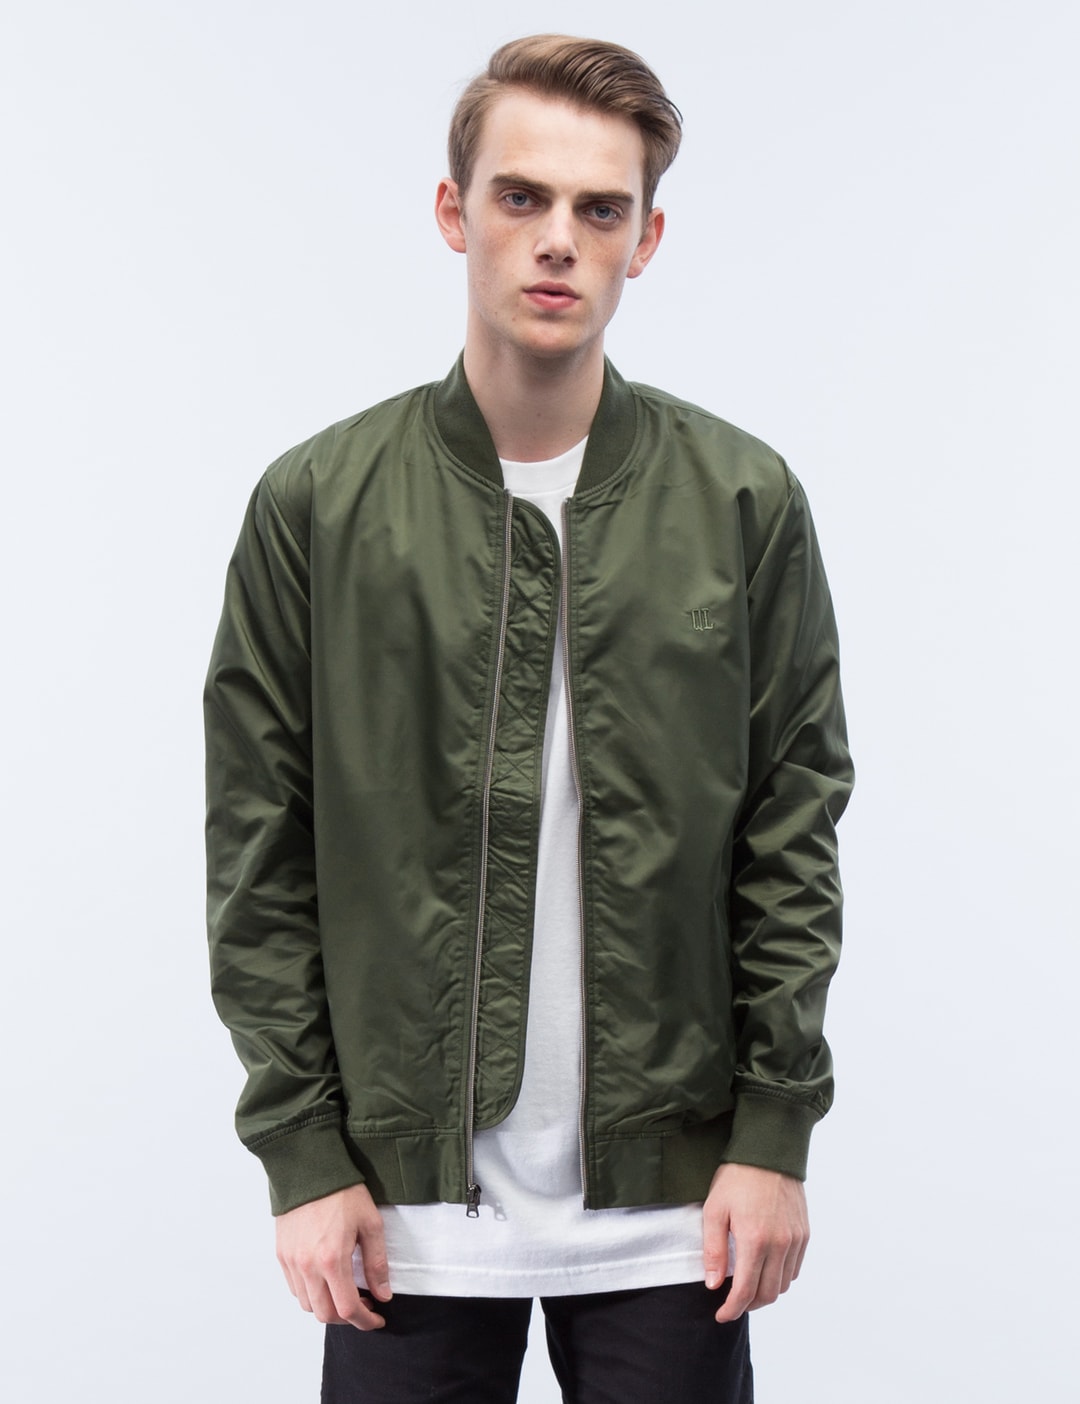 The Quiet Life - Middle Of Nowhere Jacket | HBX - Globally Curated ...